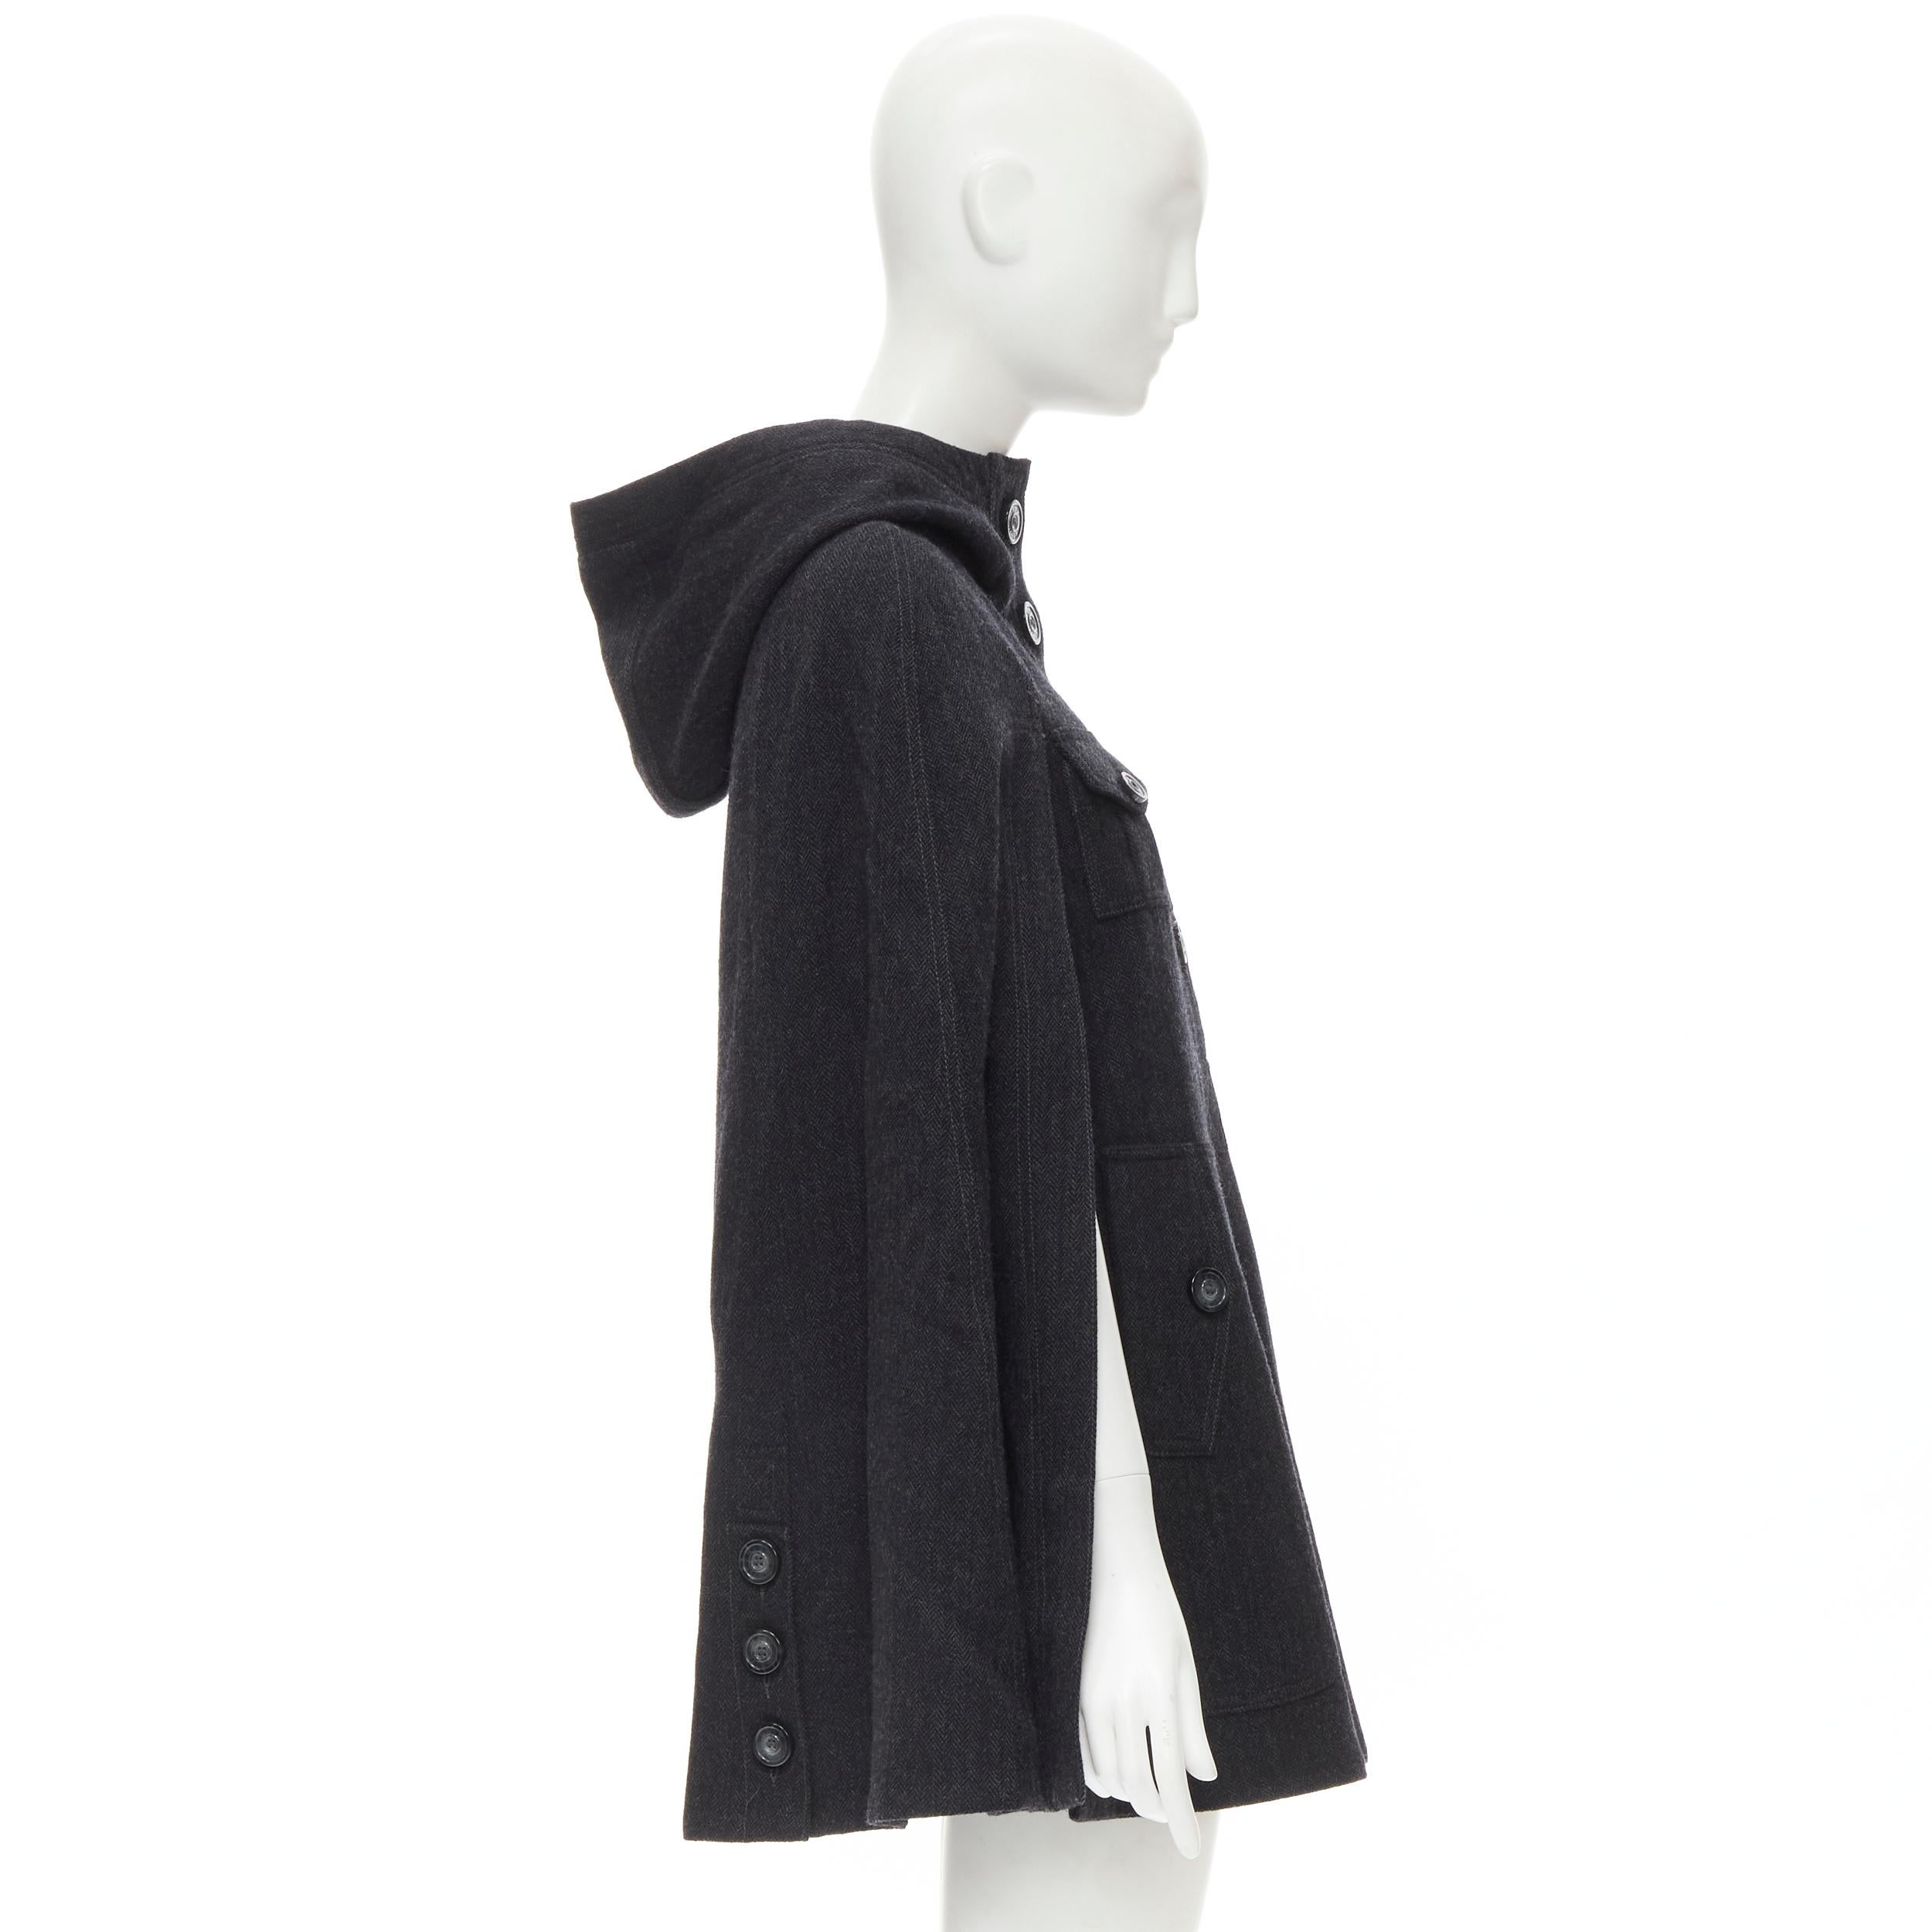 Black MARC BY MARC JACOBS grey virgin wool utility pocket hooded cape poncho coat XS